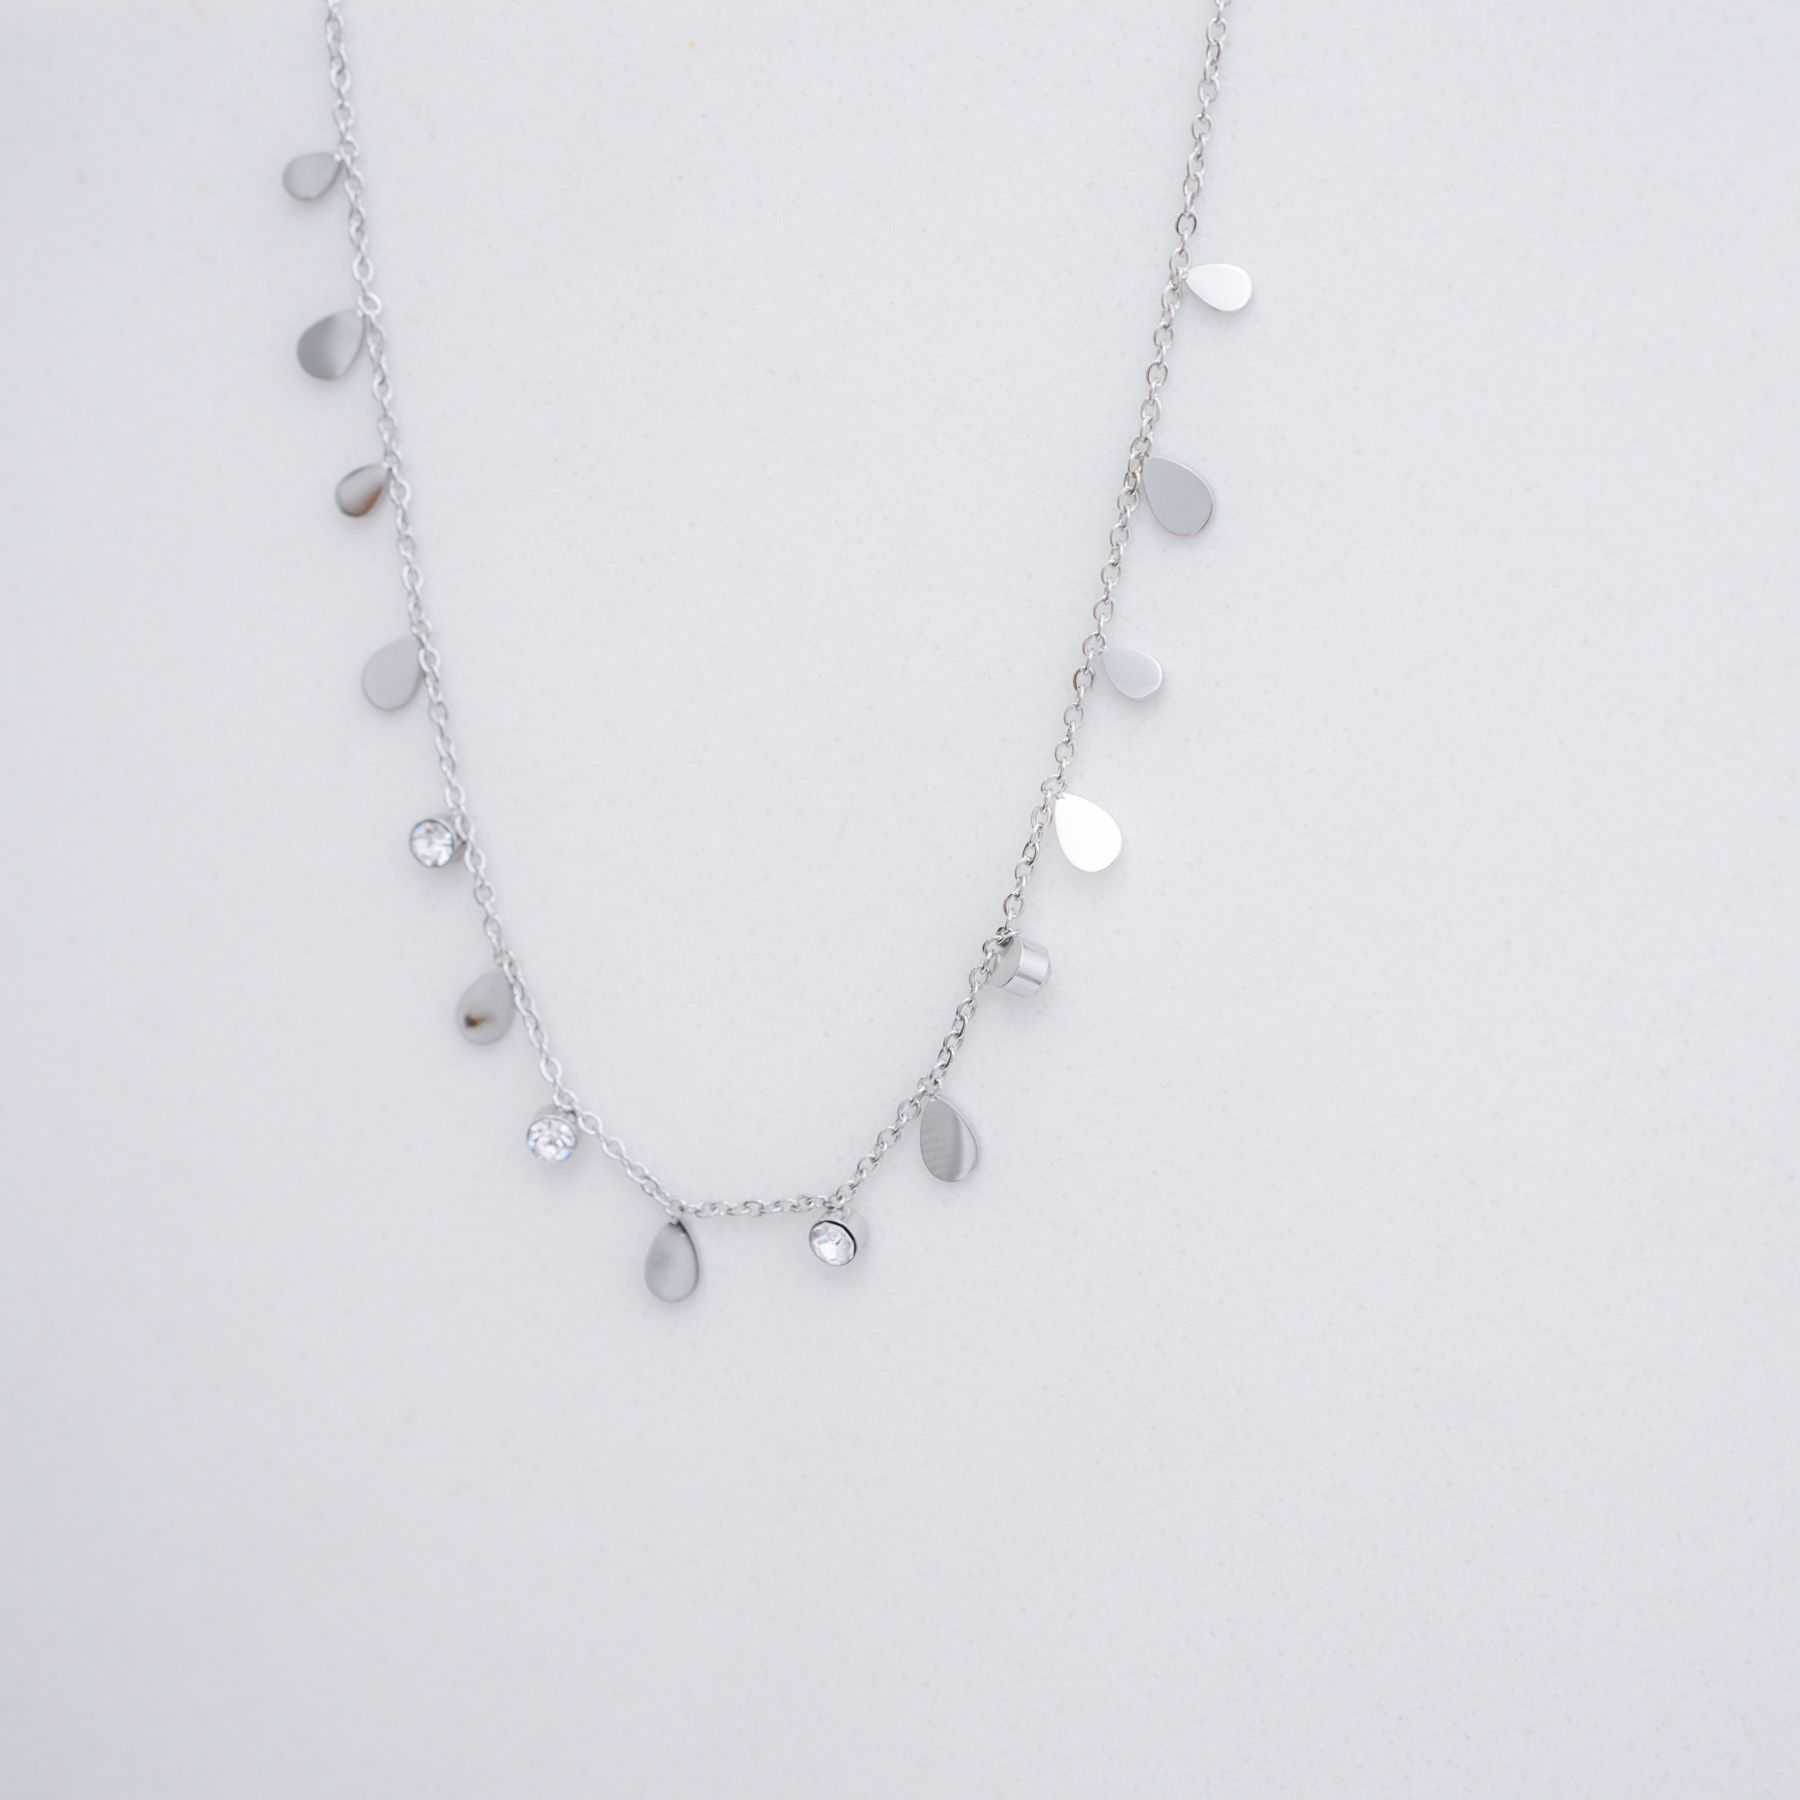 BRITTANY NECKLACE - SILVER